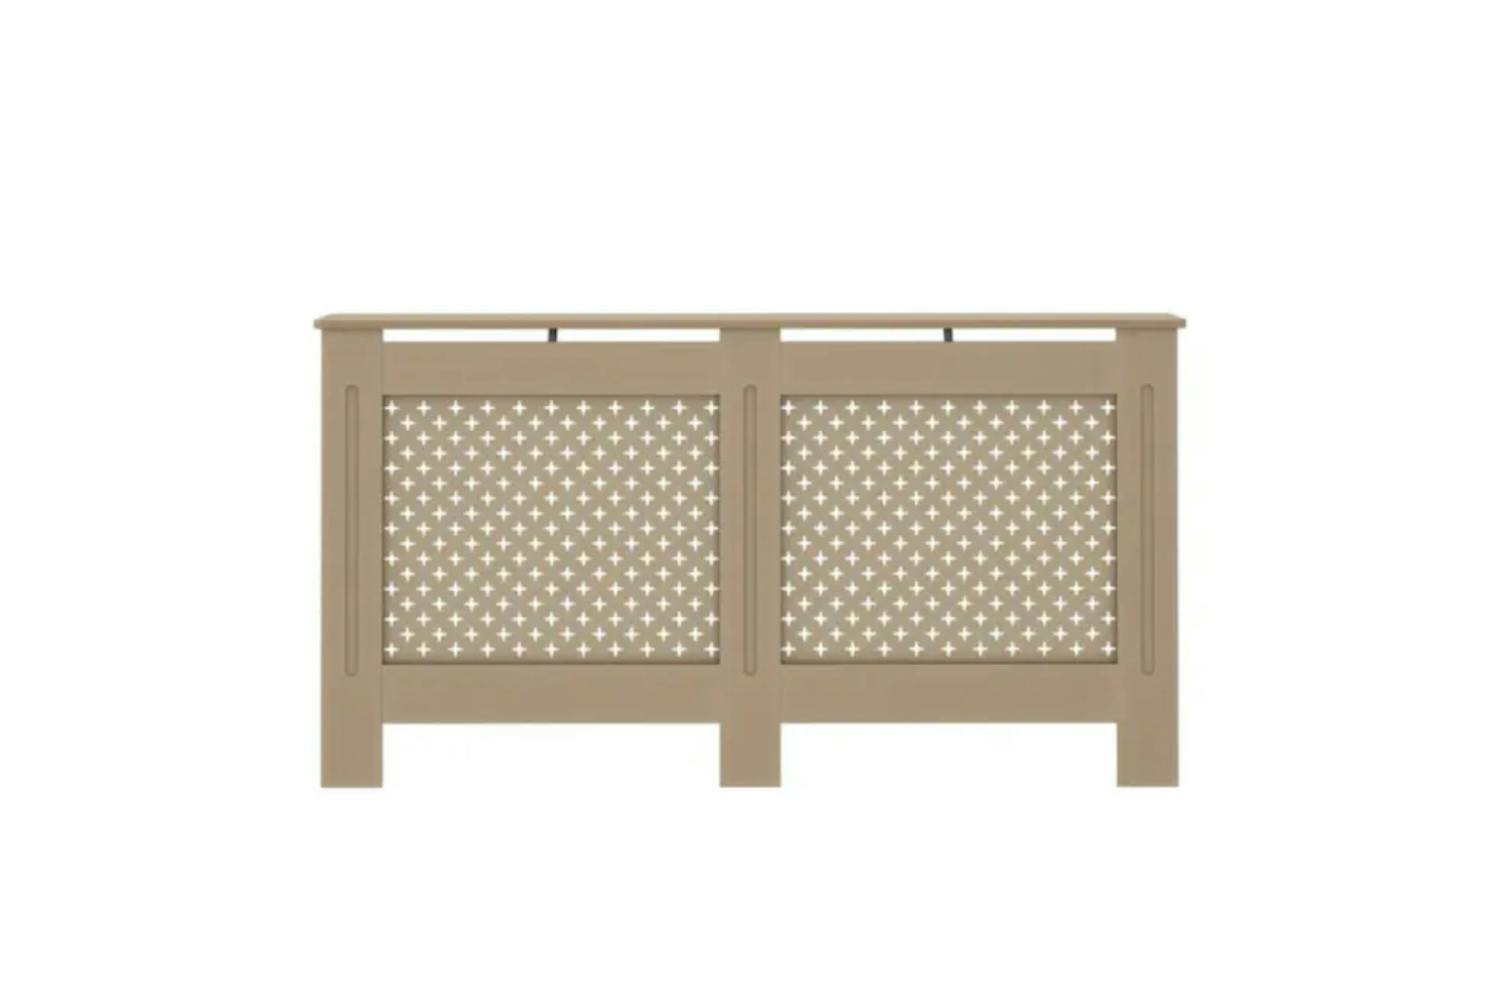 AKH RCXLCCN Ardmore Radiator Cover Criss Cross | Extra Large | Natural